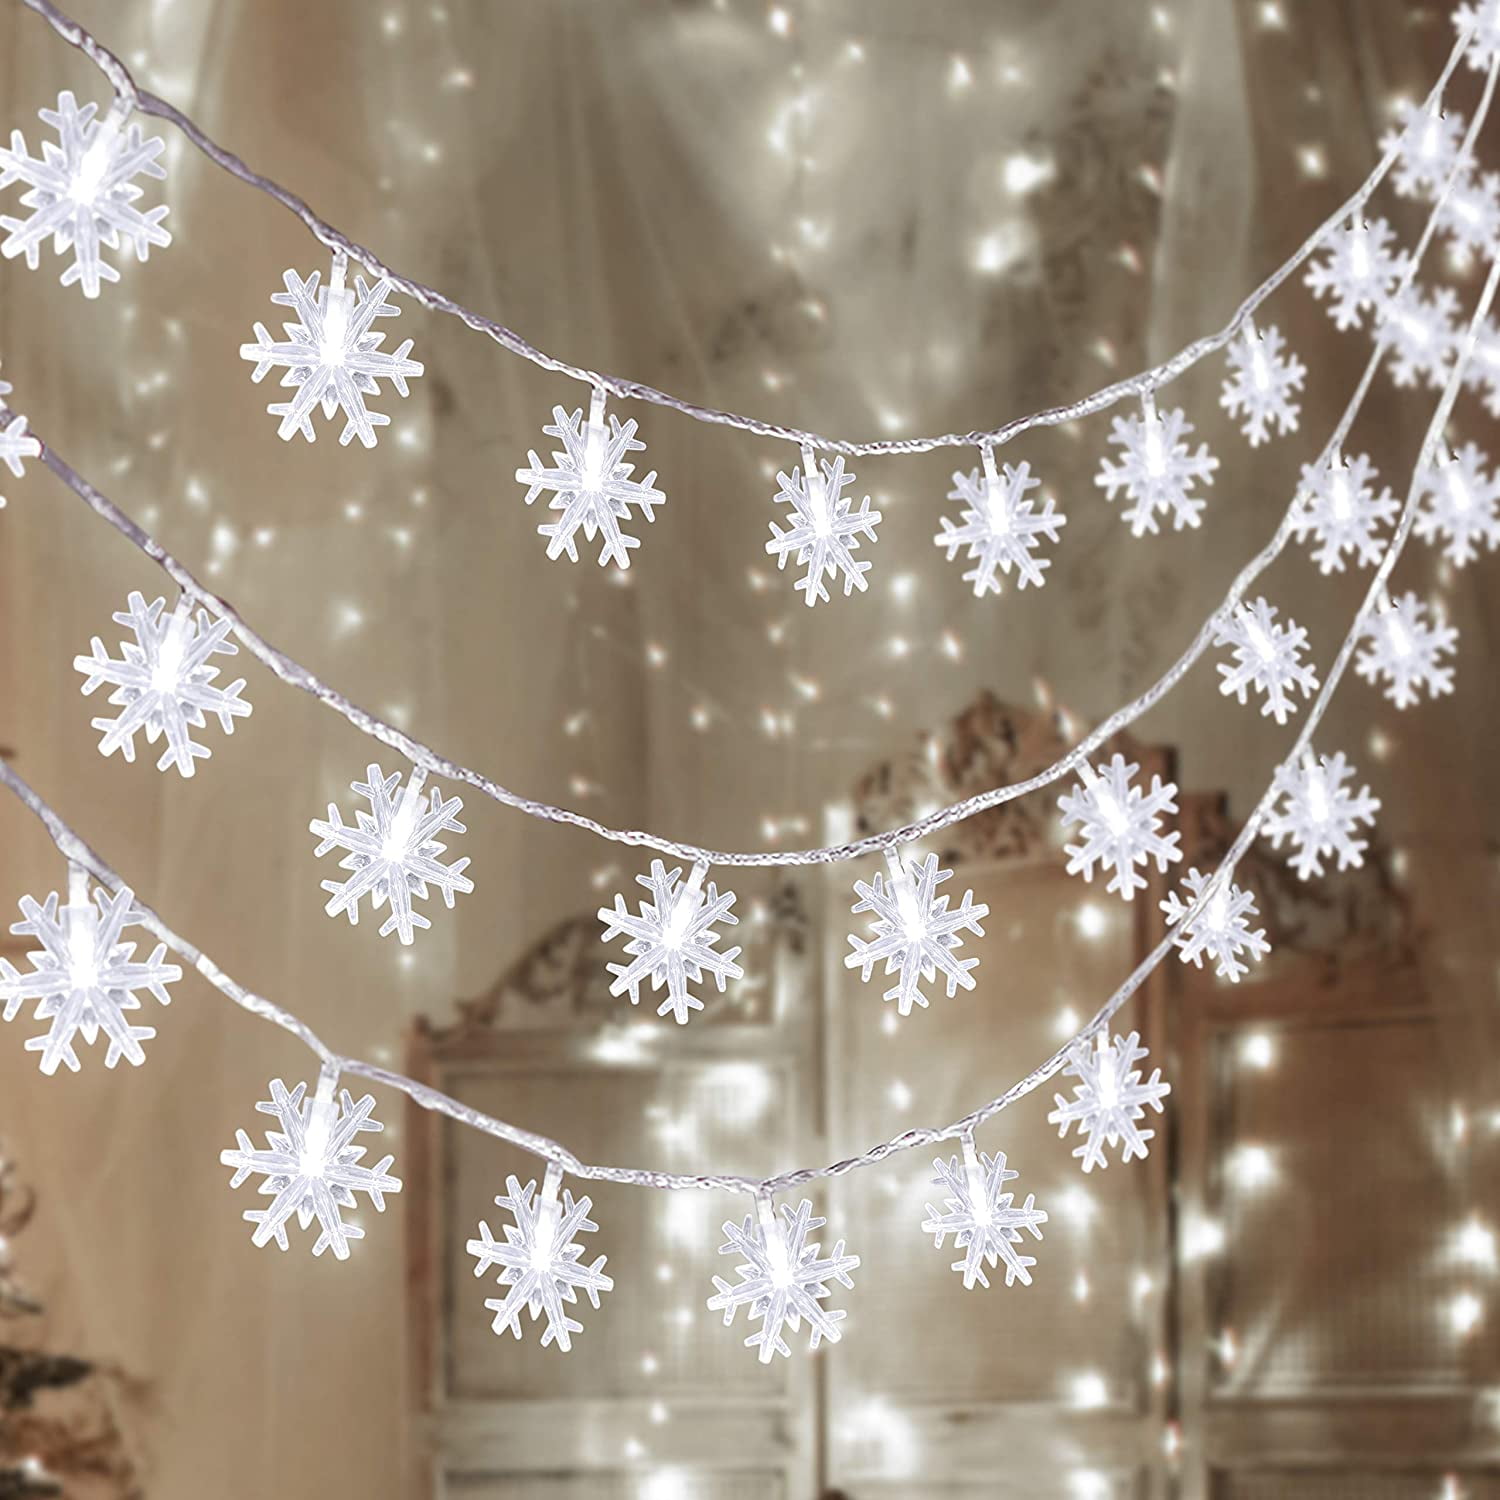 INDOOR/OUTDOOR 5 Snowflake String Lights With 7 clear Lights In Each Flake 